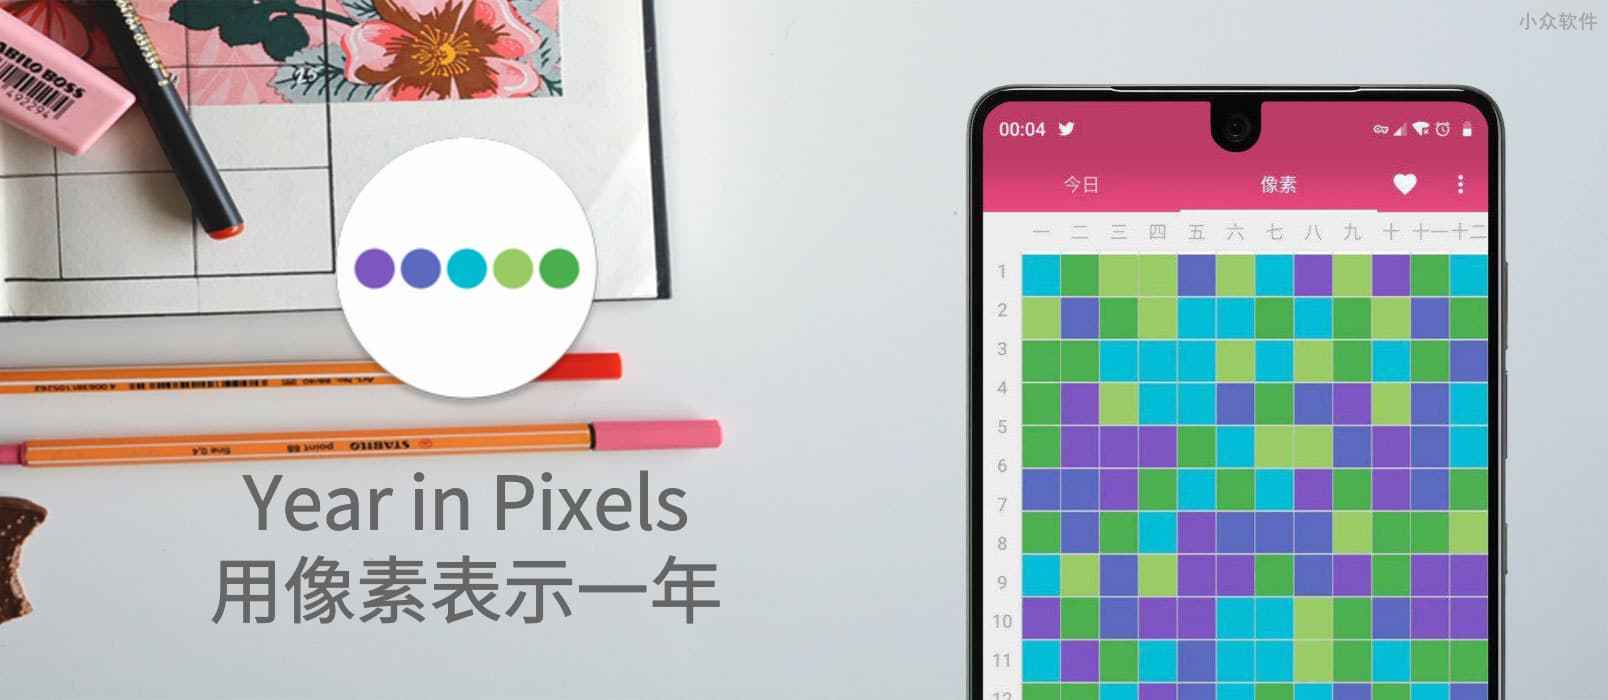 Year in Pixels – 用像素表示一年的喜怒哀乐 [Android/iOS]